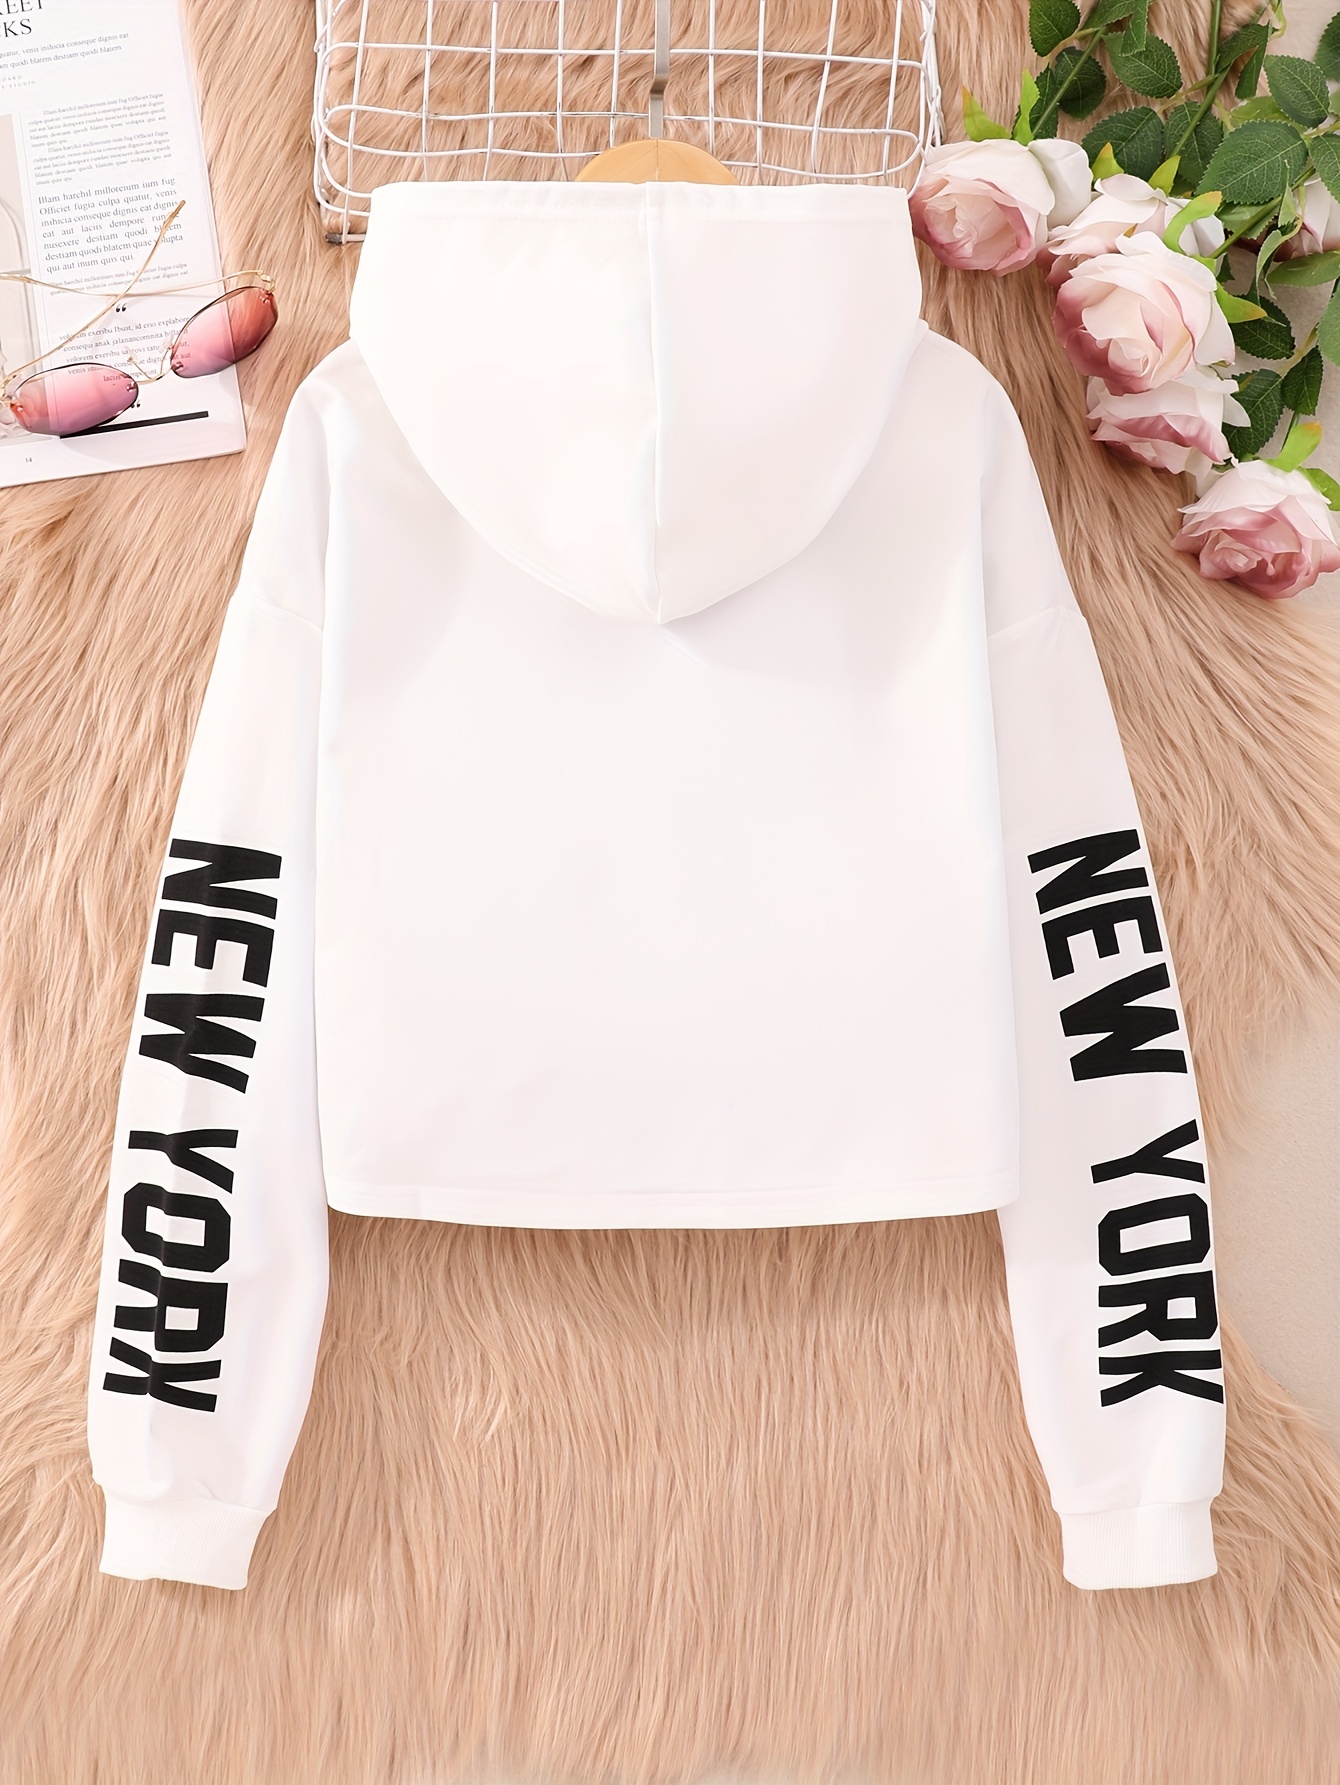 Temu 'New York' Letter Print Hoodie for Girls, Girl's Casual Graphic Design Pullover Hooded Sweatshirt with Kangaroo Pocket Streetwear for Winter Fall